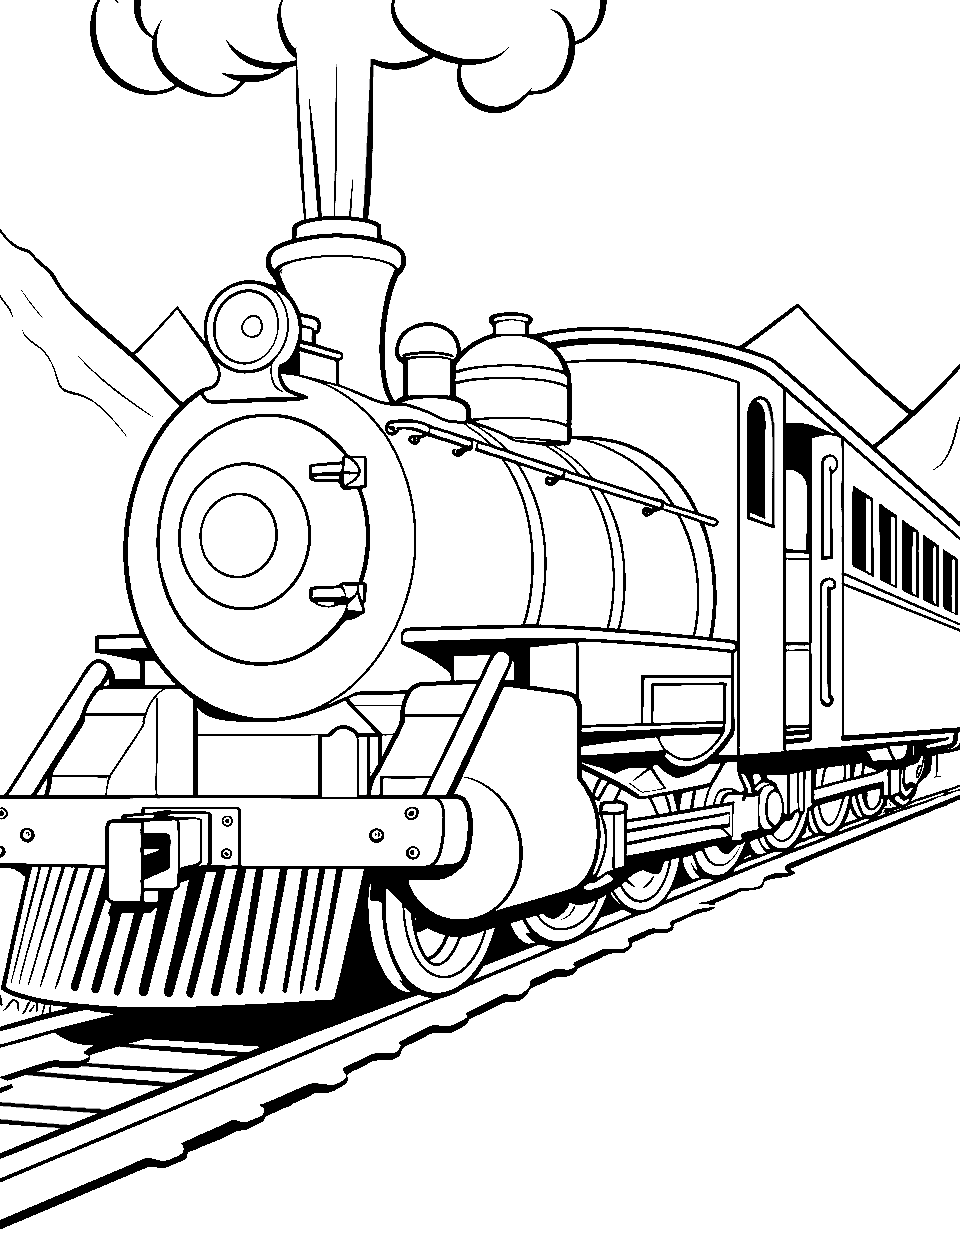 Choo Choo Train in the Mountains Coloring Page - An old-fashioned steam train chugging through the mountains.